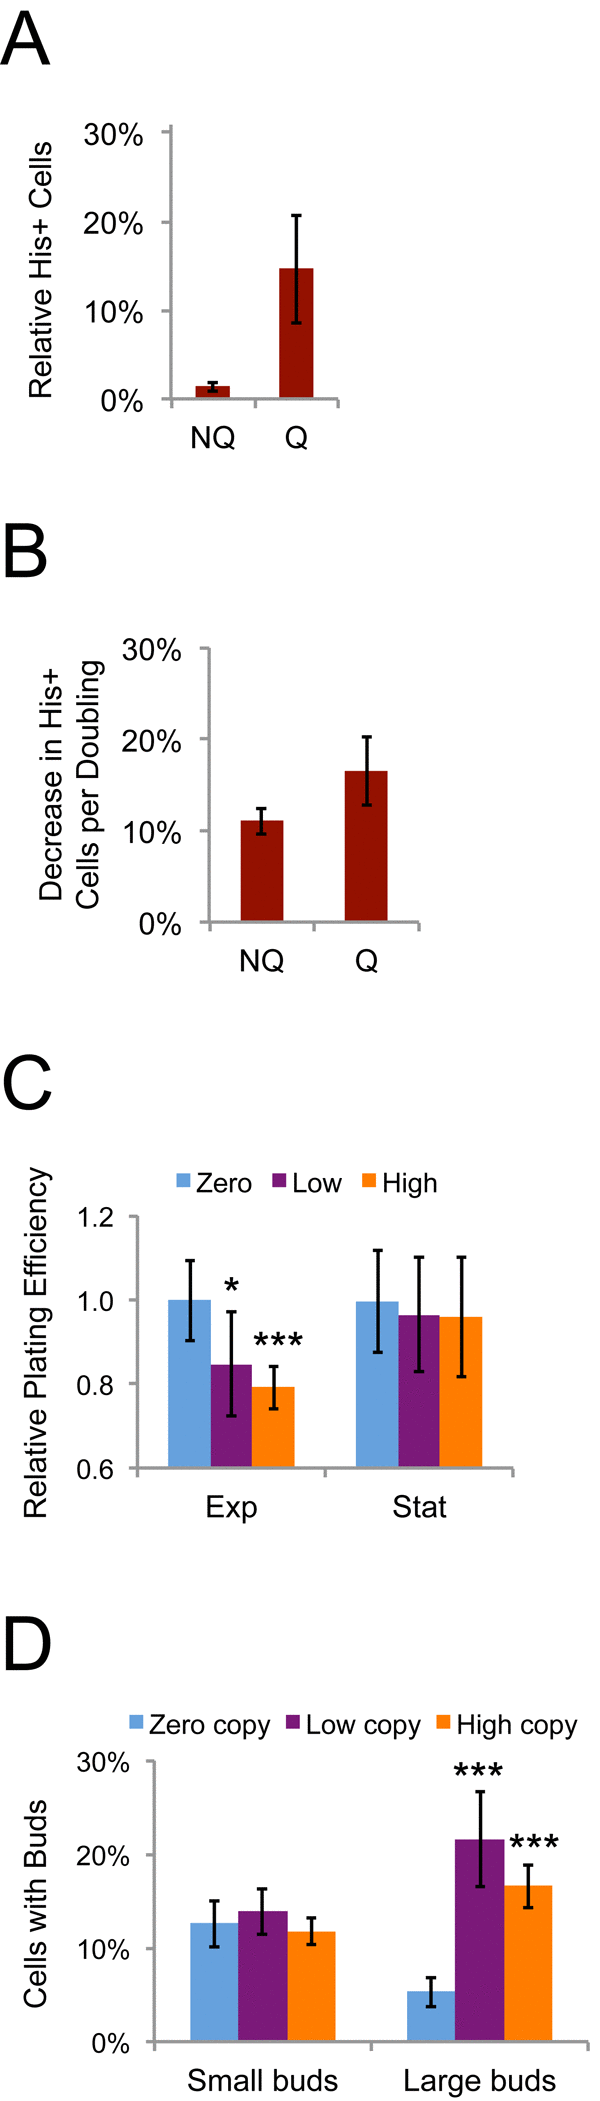 Ty1 reduces the reproductive potential of dividing cells. (A) Proportion of His+ cells in NQ or Q cell populations regrown in fresh medium at 30˚C overnight expressed as a percentage of the proportion of His+ cells in the populations prior to regrowth. (B) Relative decrease in the frequency of His+ cells per cell doubling in the populations regrown overnight for the data in panel A. (C) Plating efficiencies for mid-exponential (Exp, two days) and early stationary phase (Stat, four days) populations of S. paradoxus strains with zero, one to three (low), or about 20 (high) chromosomal copies of Ty1 grown at 20˚C and normalized to the values for the zero copy strain. Data are from five to nine trials. Three low copy and three high copy strains were used. (D) Percentages of cells with buds in strains with the indicated Ty1 copy number grown at 20˚C for seven days, determined by light microscopy. Buds less than or more than 50% the size of the mother cells were scored as small or large, respectively. Three low copy and three high copy strains were used and results are from five to six trials. All data are mean values with standard deviation. Single or triple asterisks indicate p